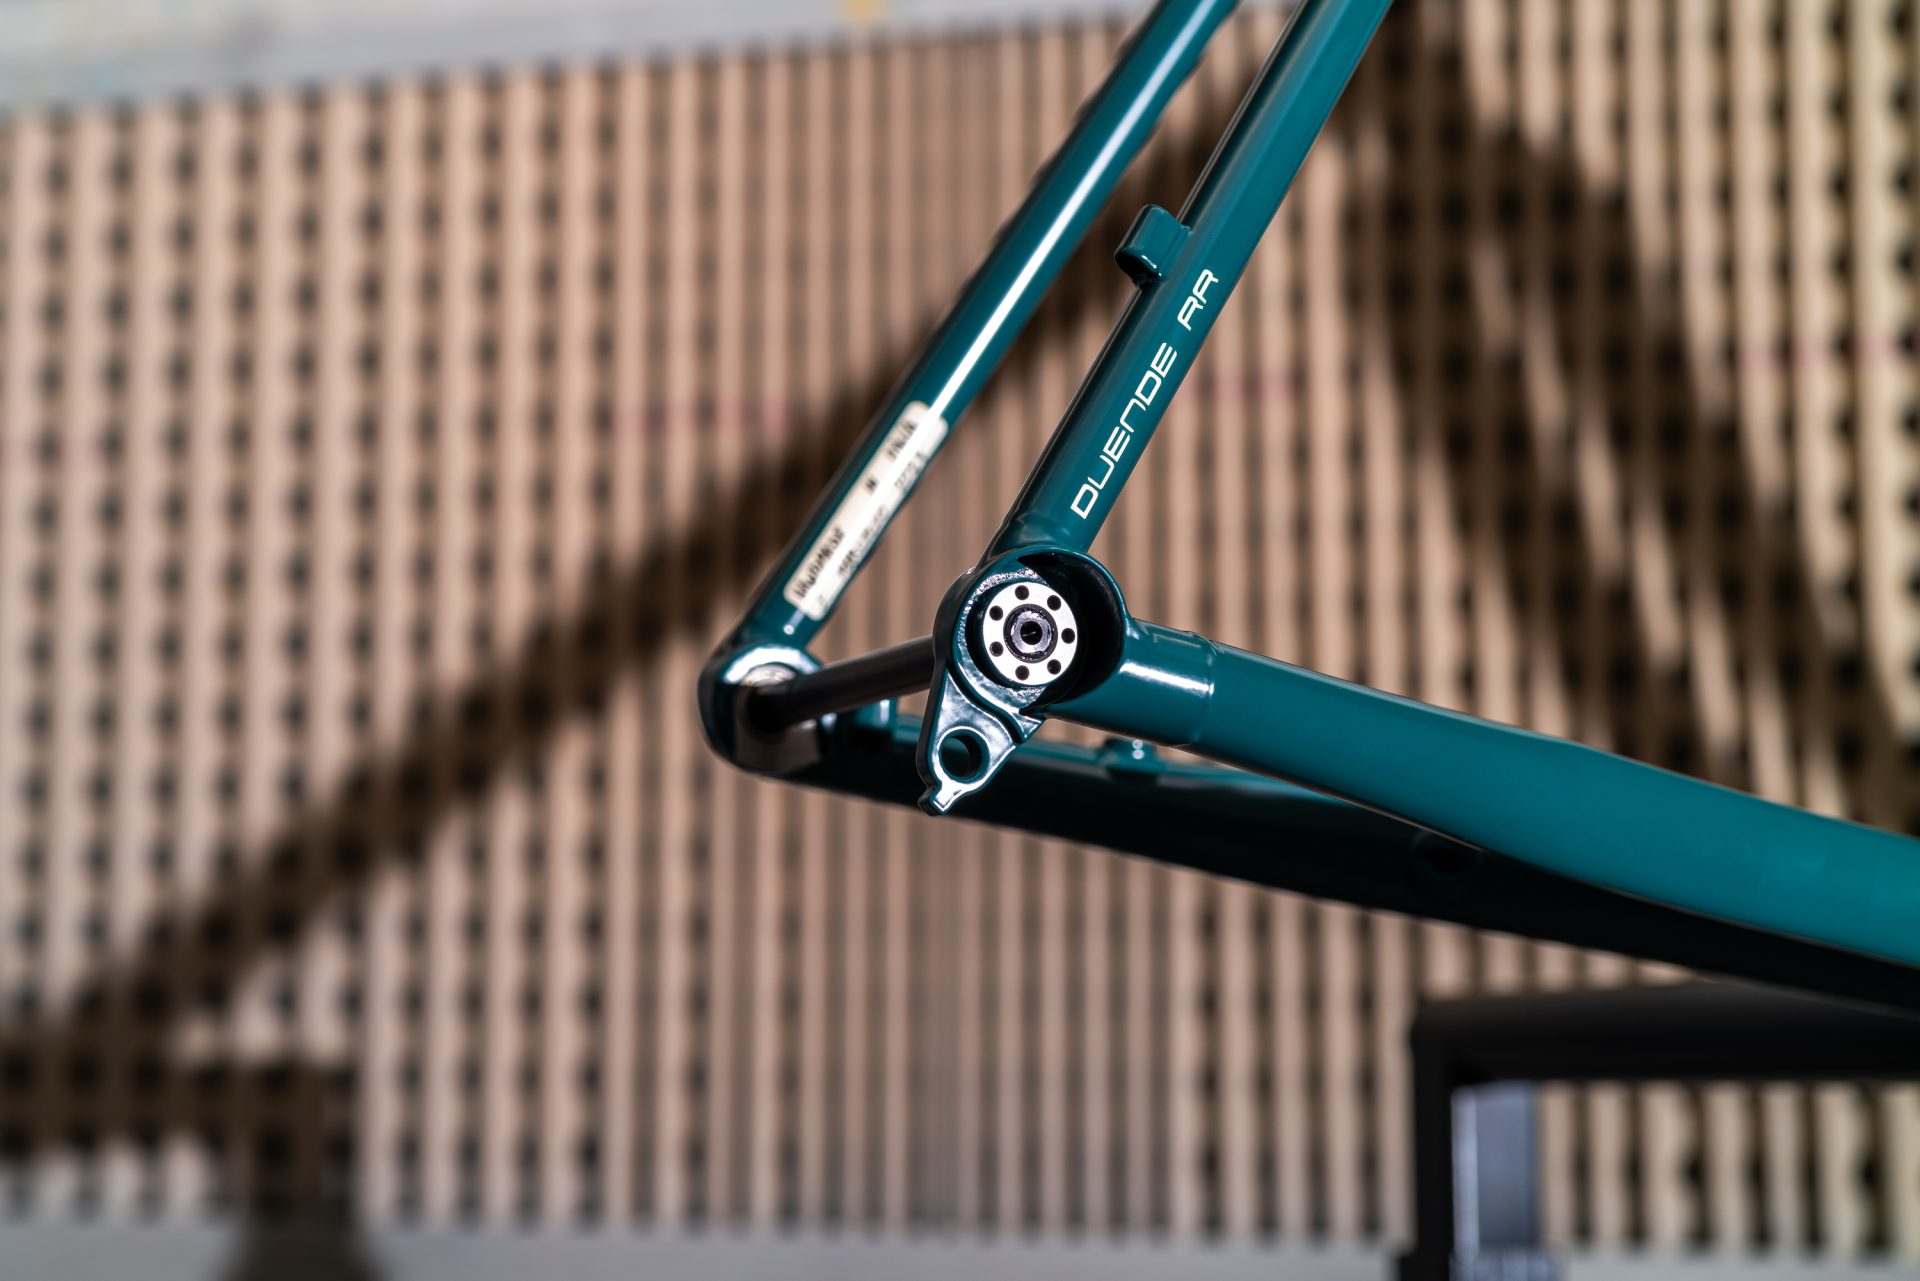 The rear triangle of the Pegoretti Duende Rock & Roll, with a through-axle dropout. The dropouts are hooded and attach cleanly to the seat and chainstays.